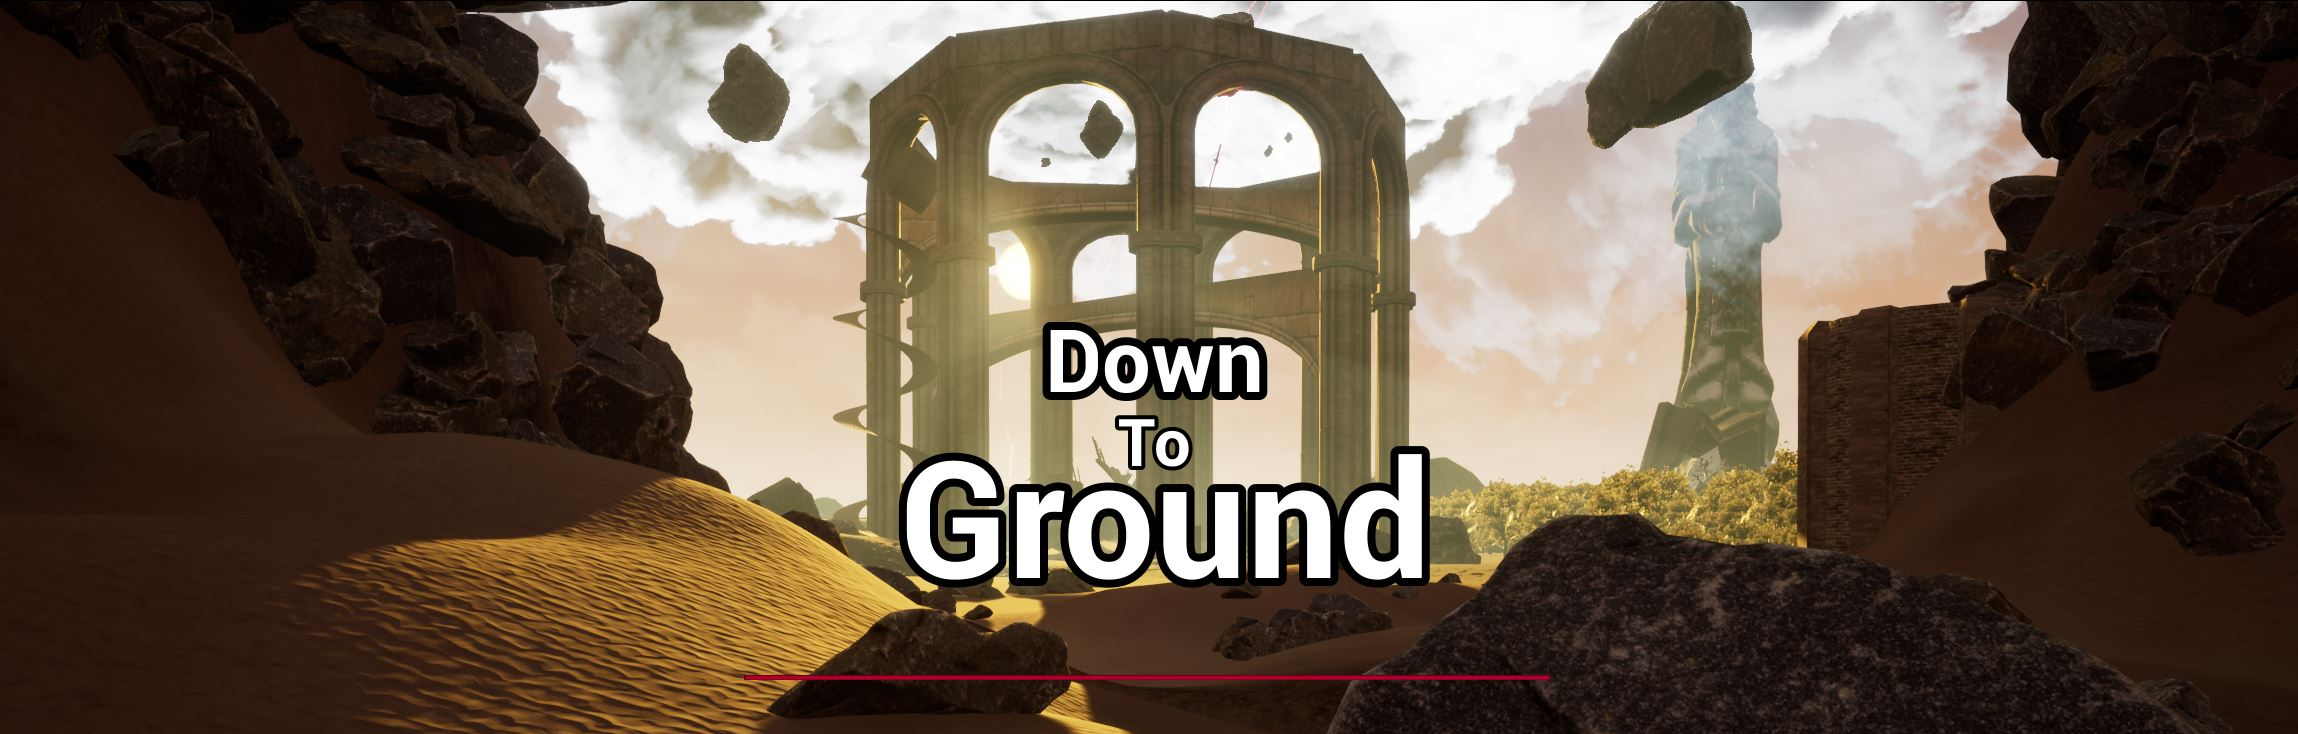 Down To Ground